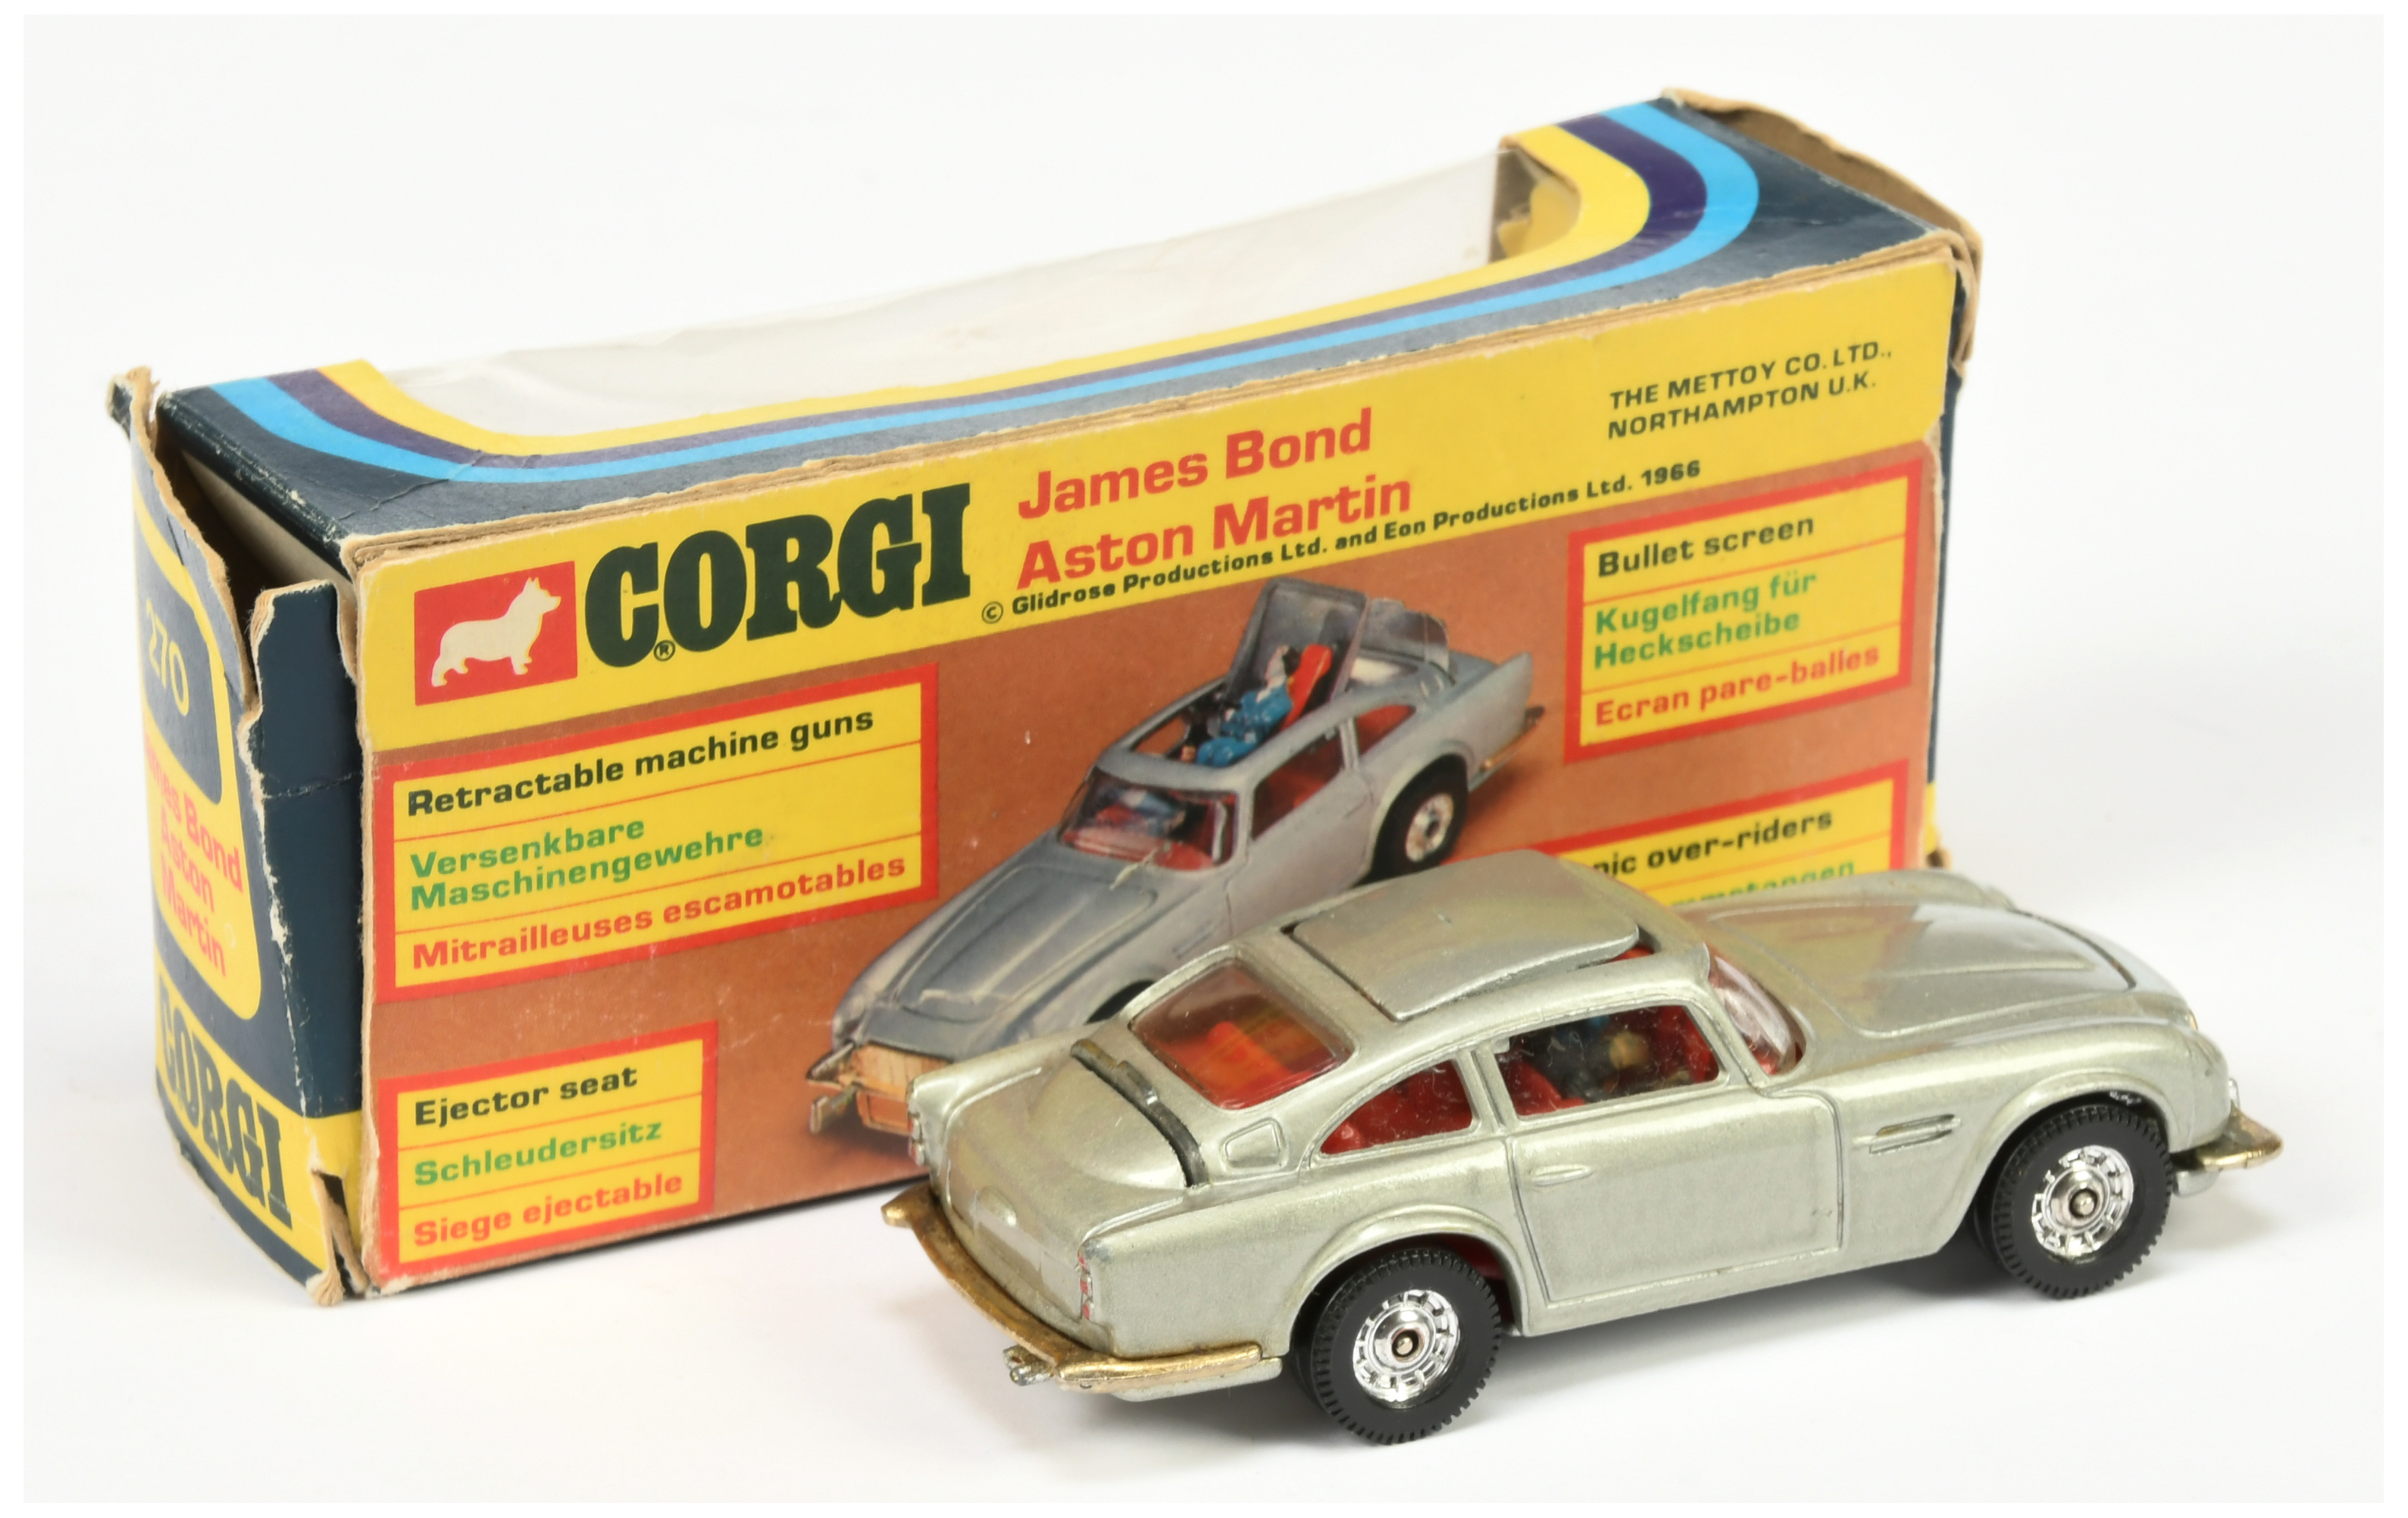 Corgi Toys 270 "James Bond" Aston Martin DB5 (2nd issue) - Silver-grey body, red interior with "J... - Image 2 of 2